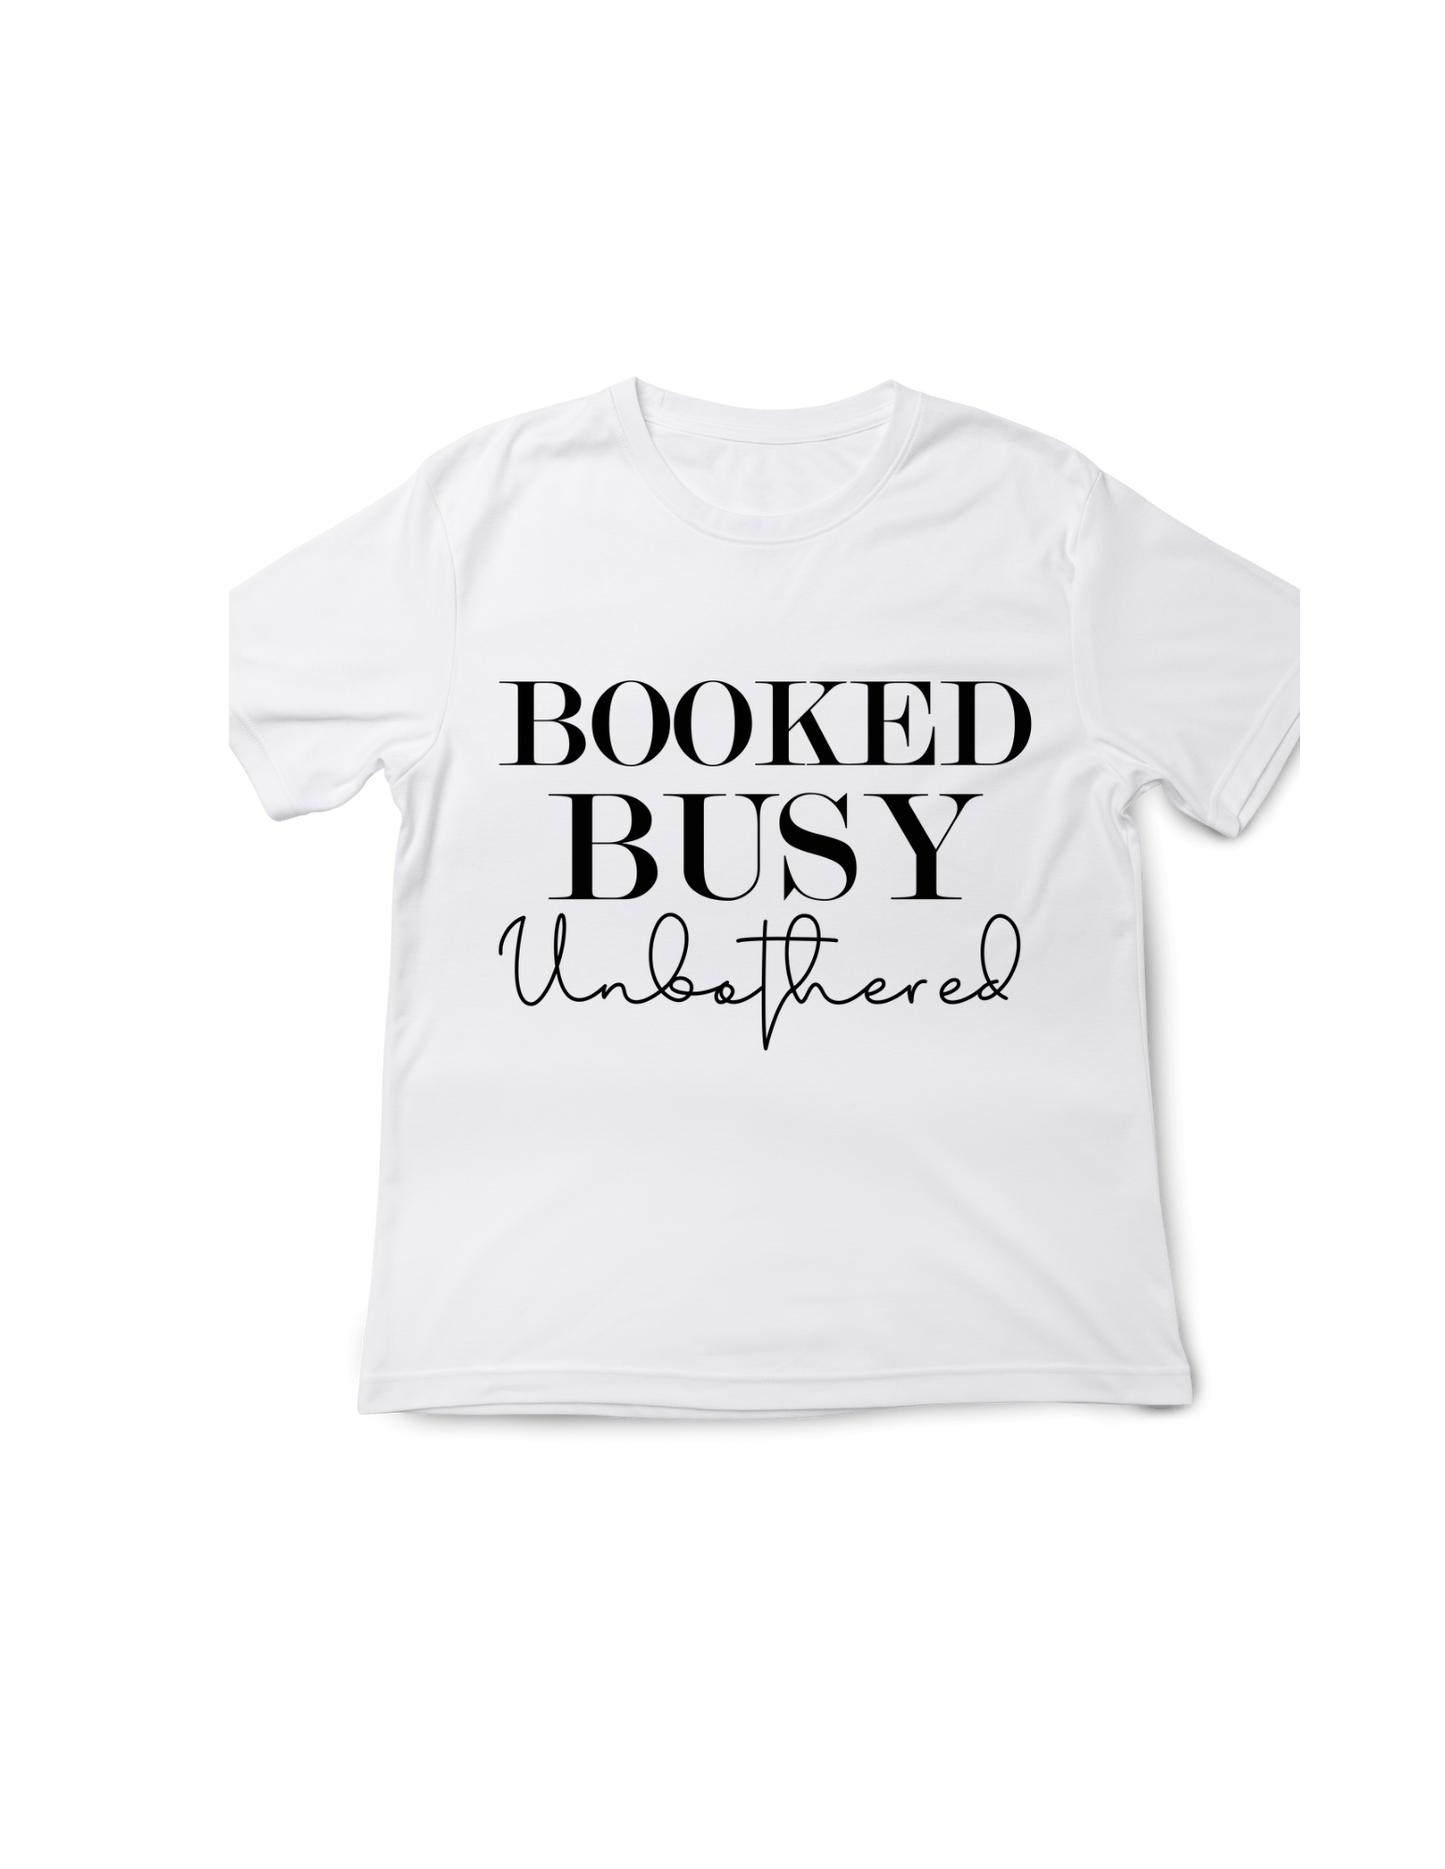 Booked busy